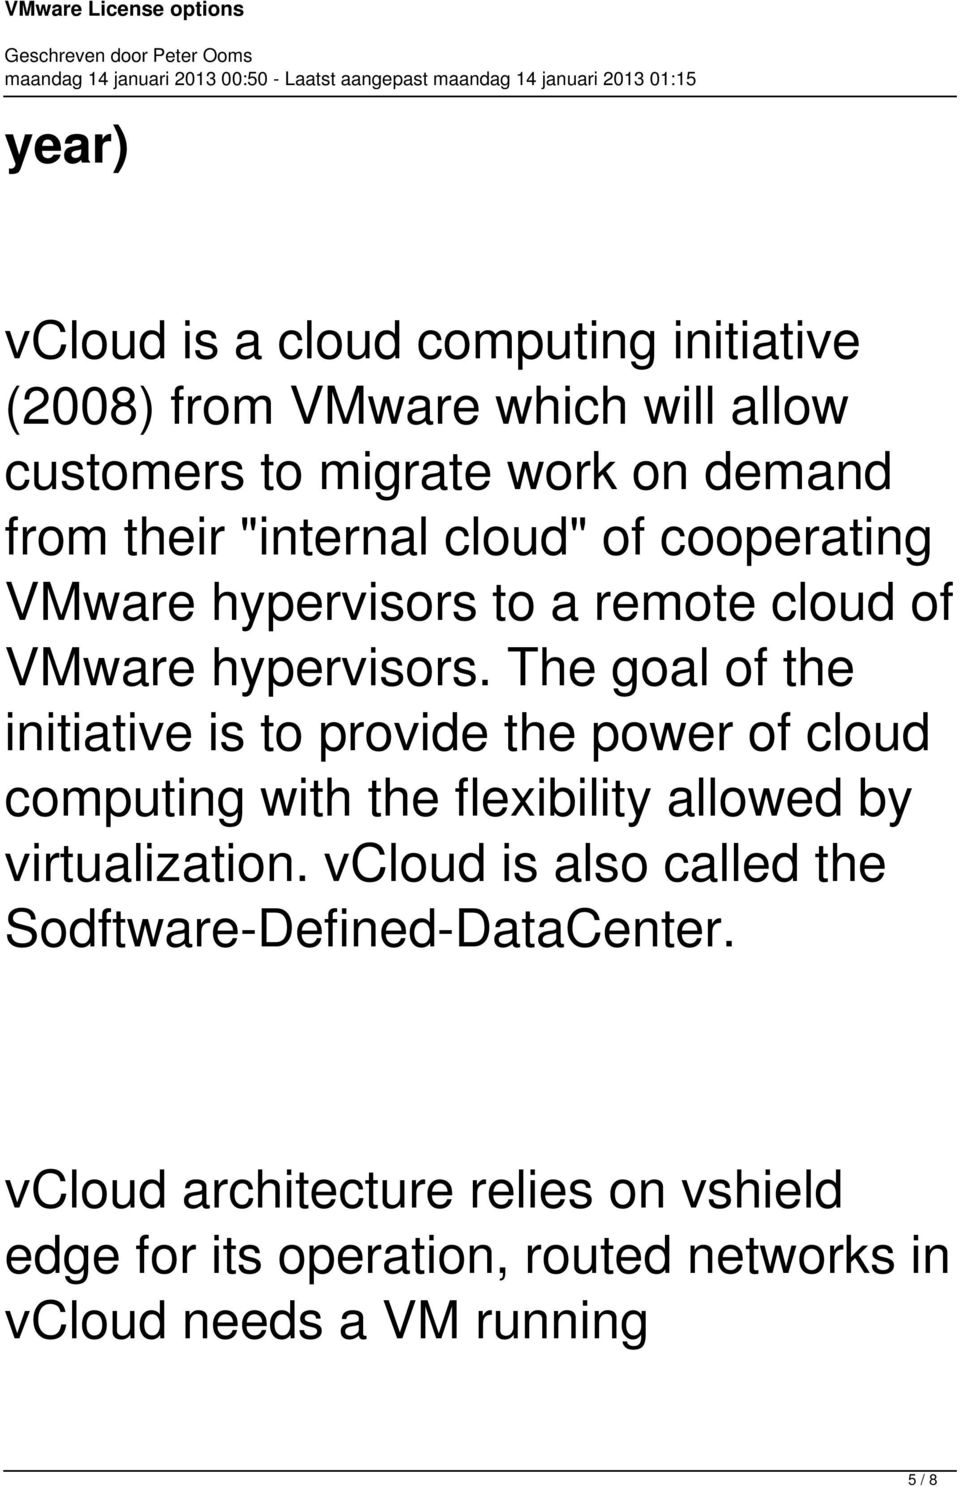 The goal of the initiative is to provide the power of cloud computing with the flexibility allowed by virtualization.